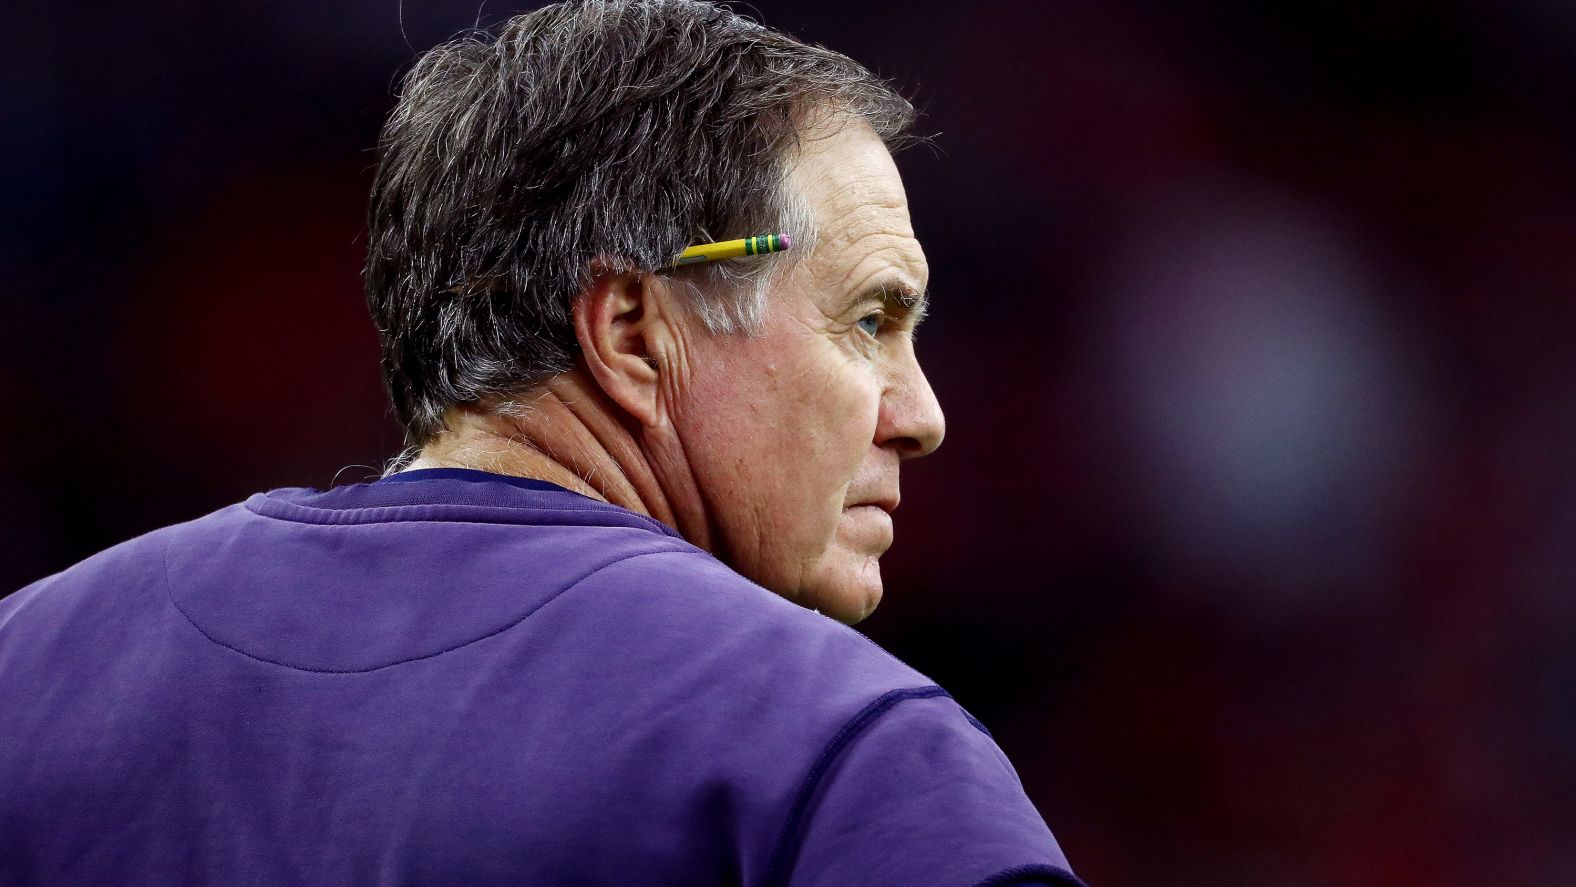 <strong>Most Super Bowl wins for a head coach:</strong> Bill Belichick won six Super Bowls as head coach of the Patriots. Belichick also won two Super Bowls as an assistant coach with the New York Giants.